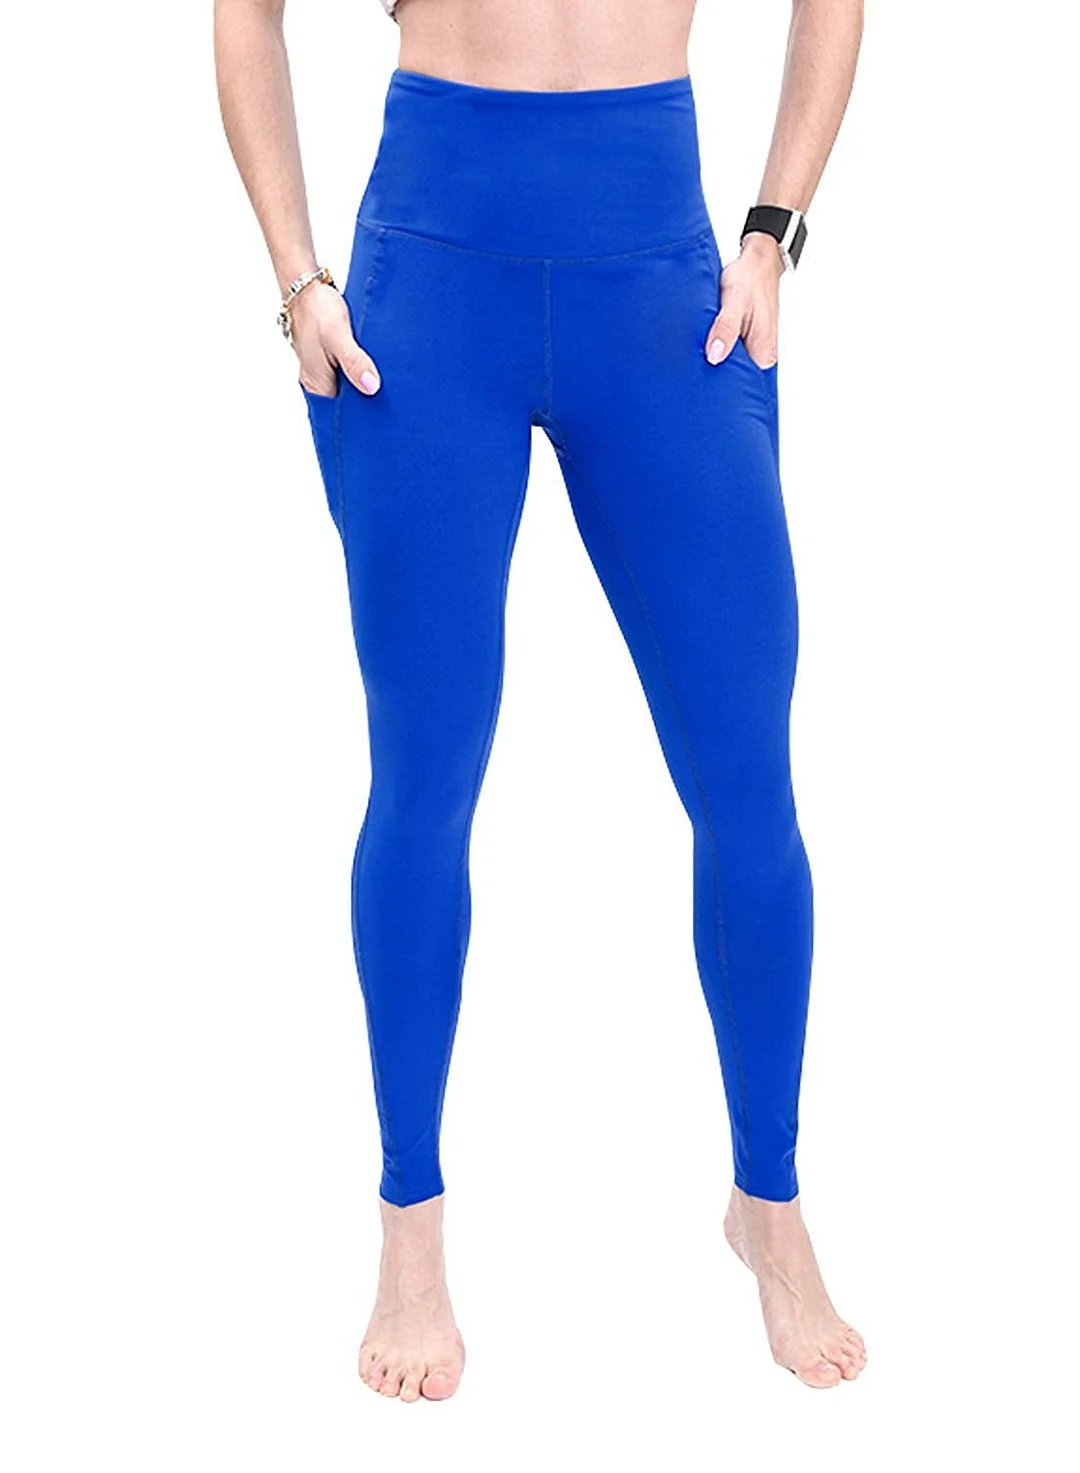 Yoga Pants with Pocket for Women High Waisted Workout Leggings